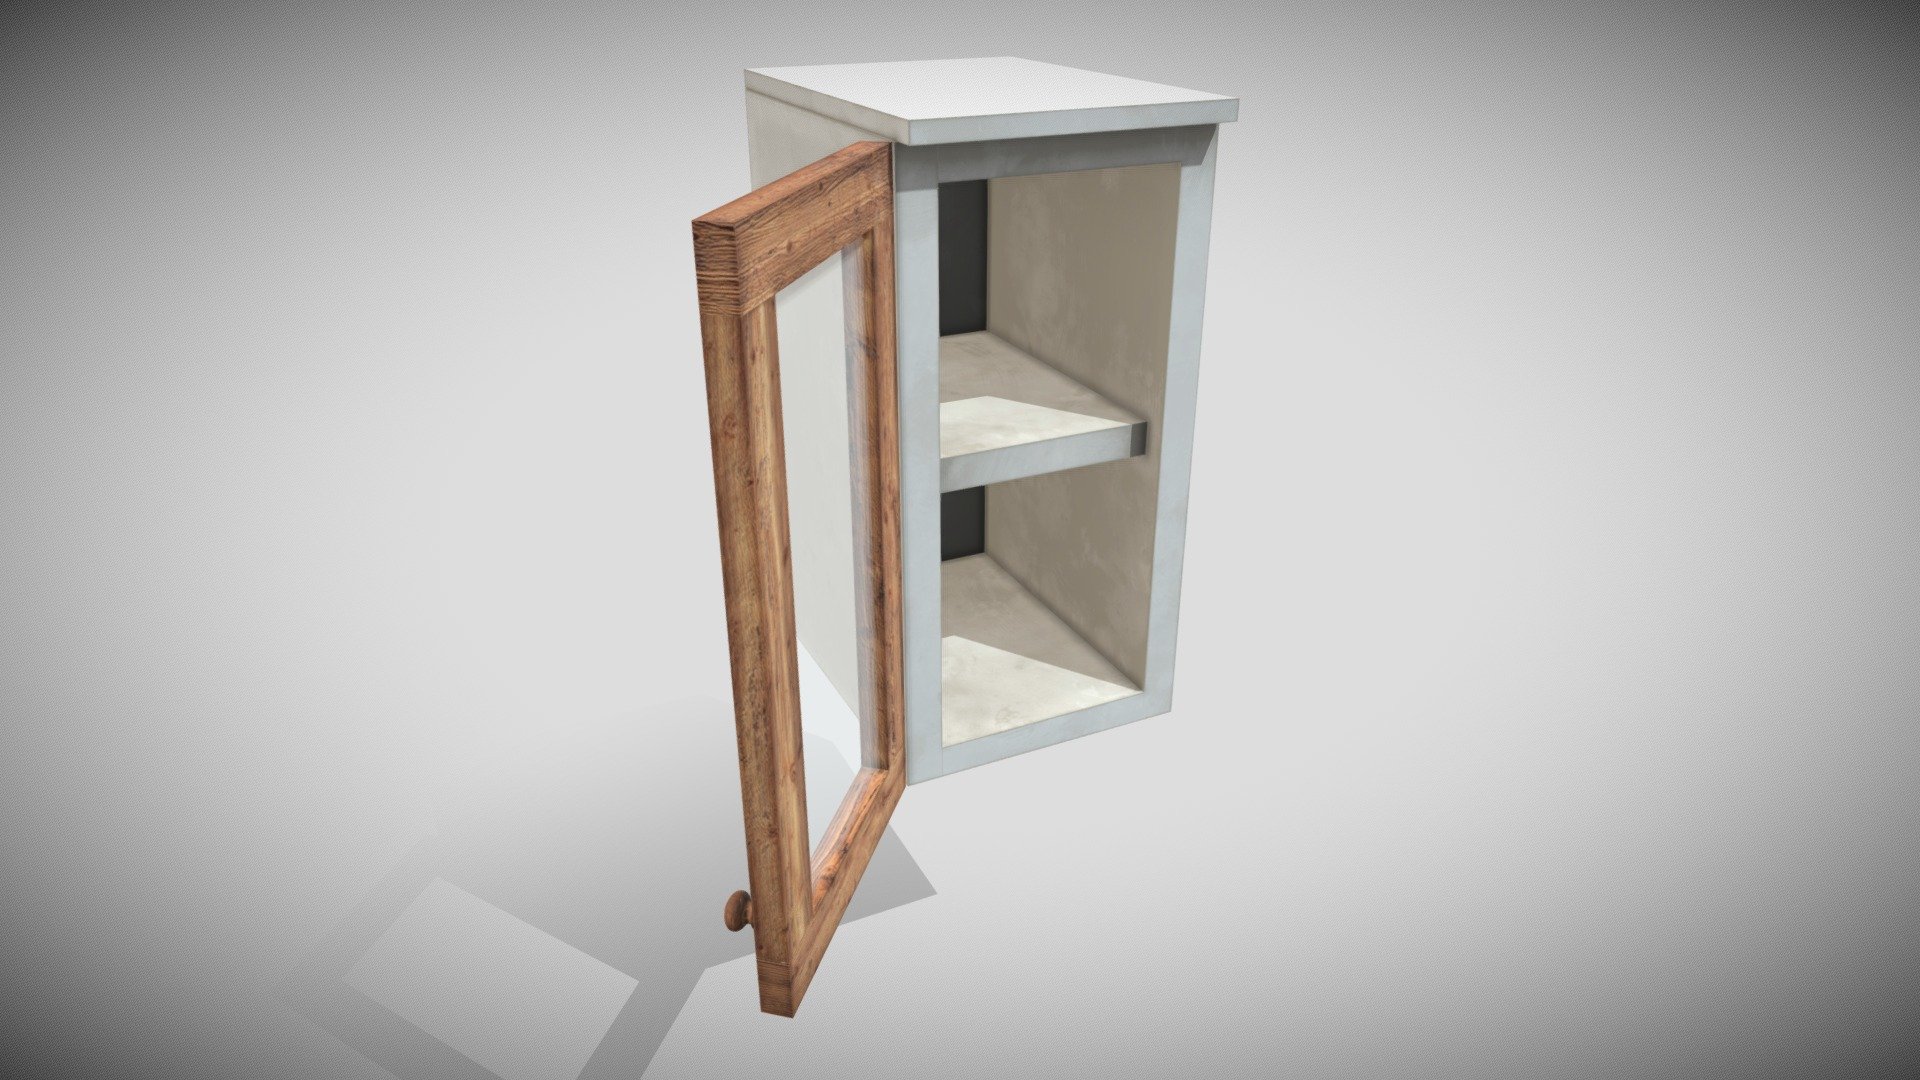 One Material PBR 4k Metalness

Pivot at Zero Bottom

Size OK

Door is separate object with Pivot in right place and can be animated

Complete Compilatio https://skfb.ly/ovXFn - Kitchen Modules - Mod B - Buy Royalty Free 3D model by Francesco Coldesina (@topfrank2013) 3d model